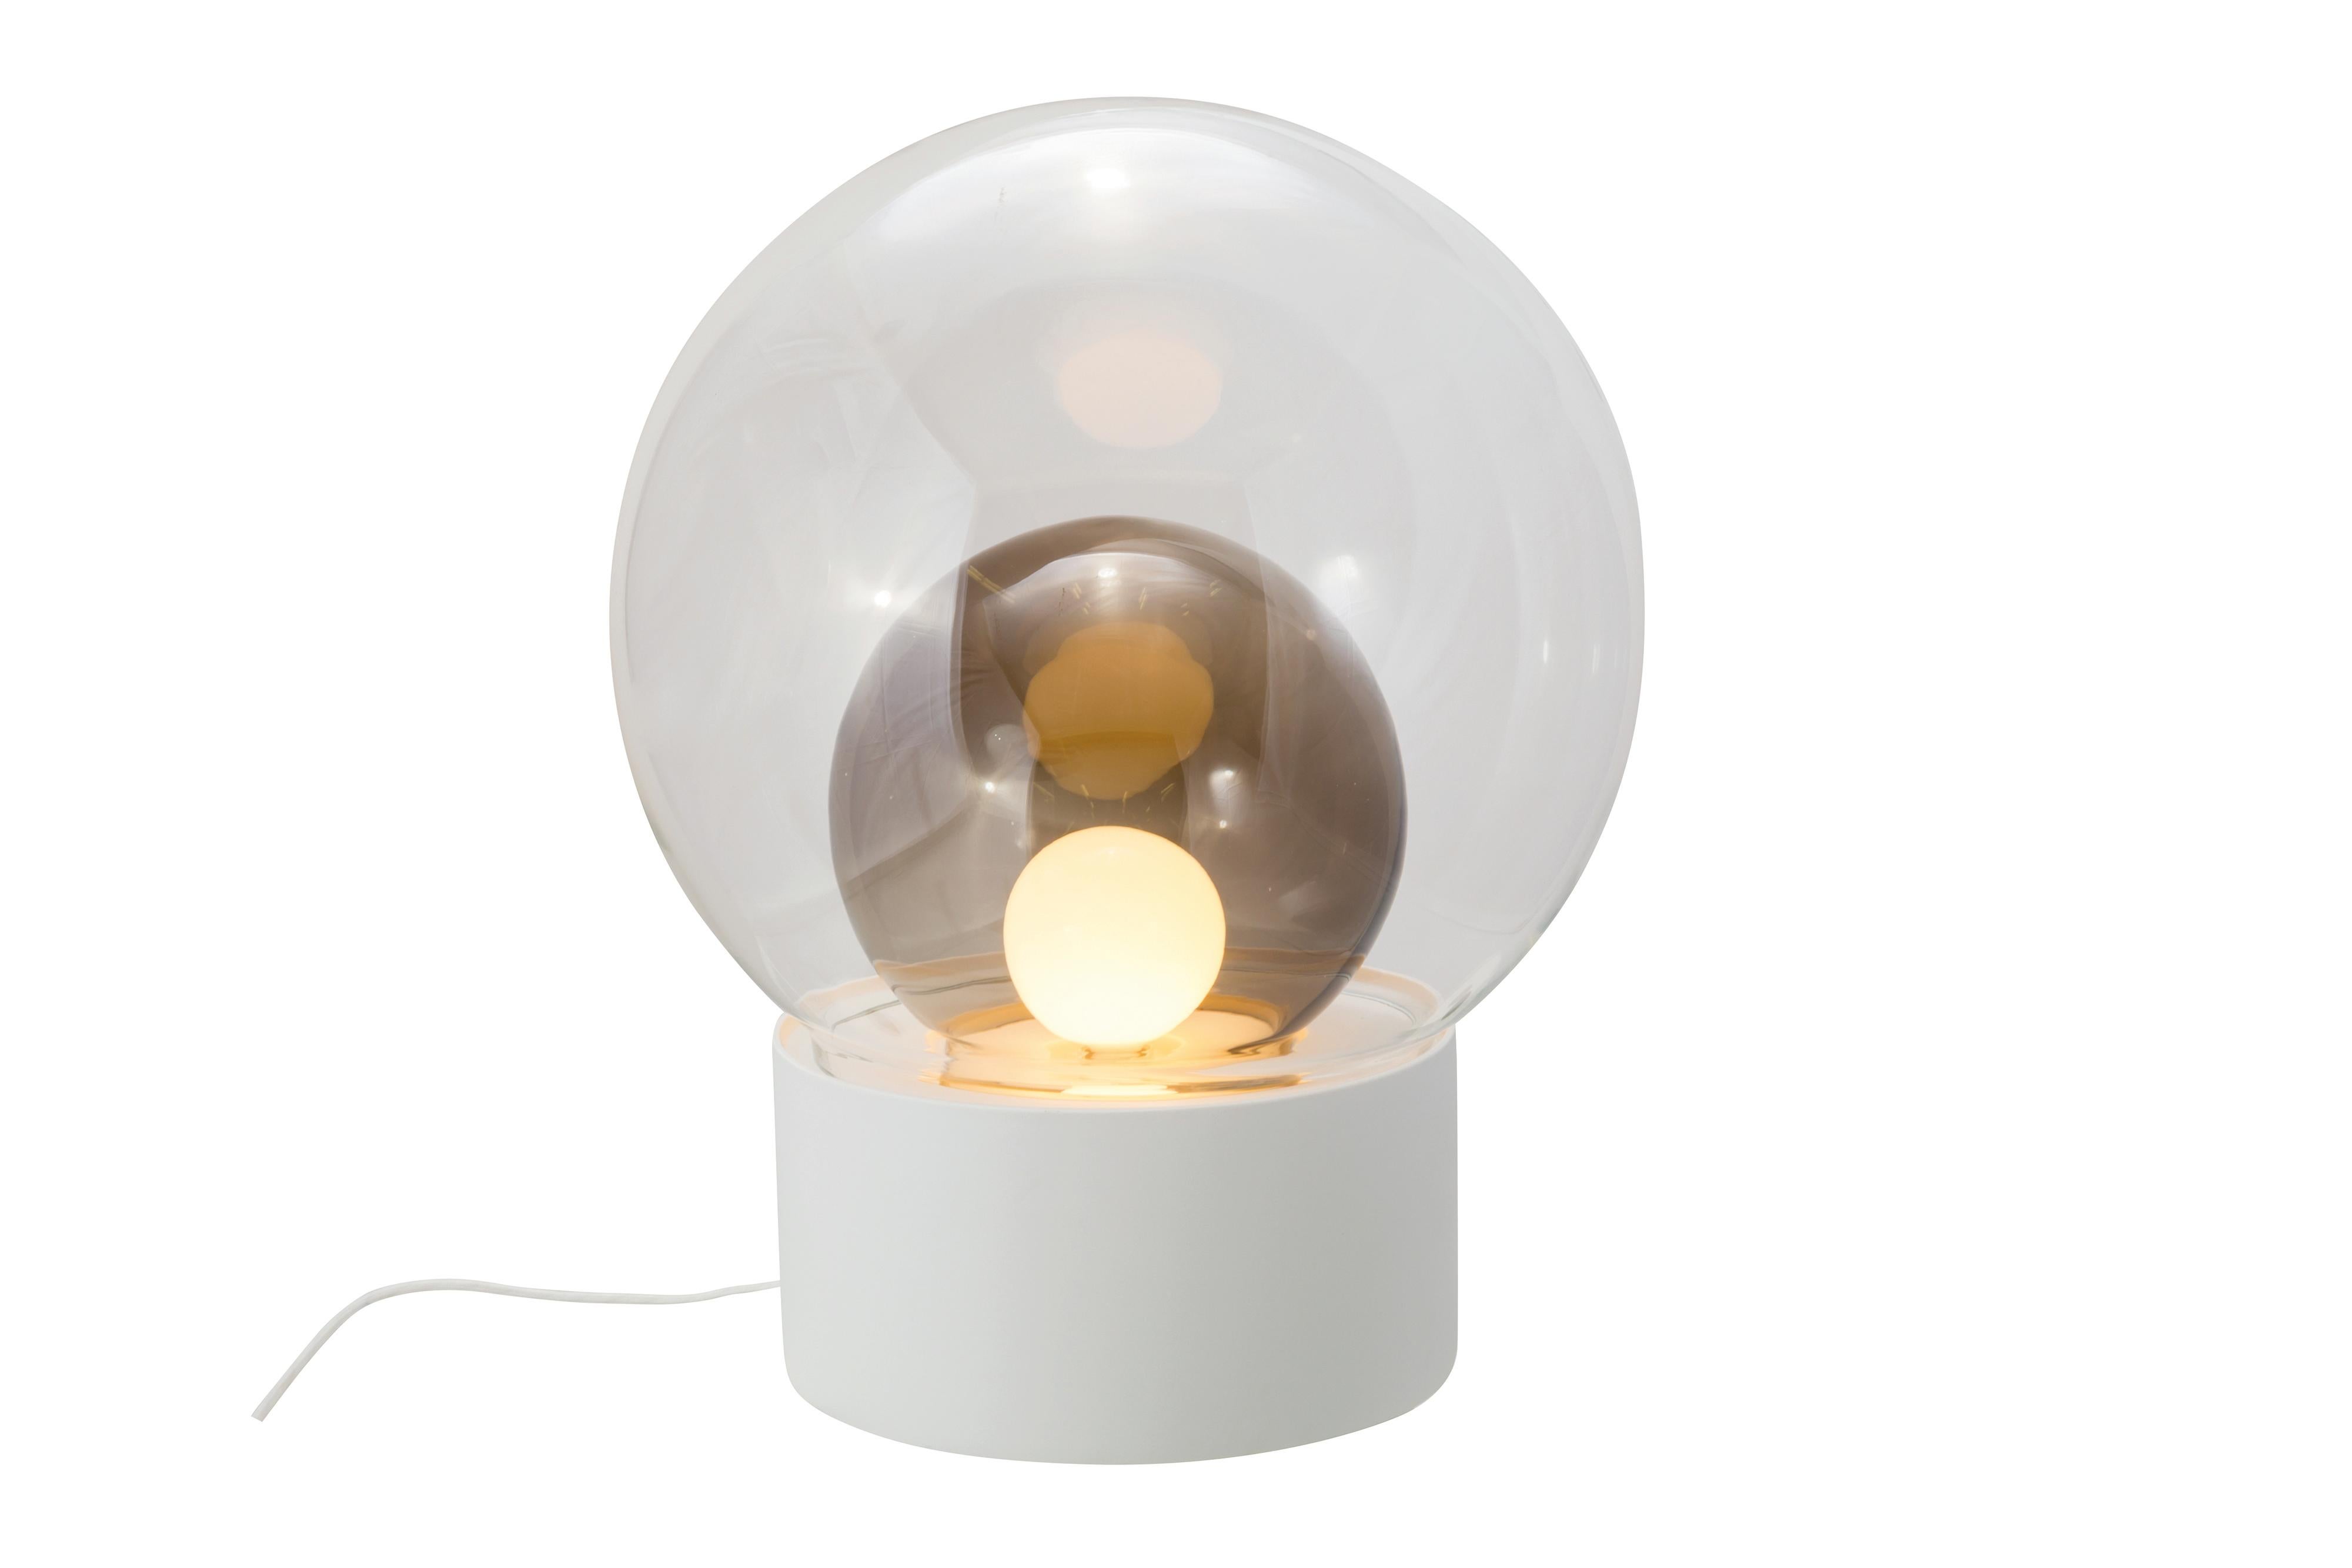 Boule medium transparent smoky grey white floor lamp by Pulpo.
Dimensions: D58 x H74cm.
Materials: ceramic, handblown glass, coloured, textile.

Also available in different finishes: transparent opal white black, transparent smoky grey black,